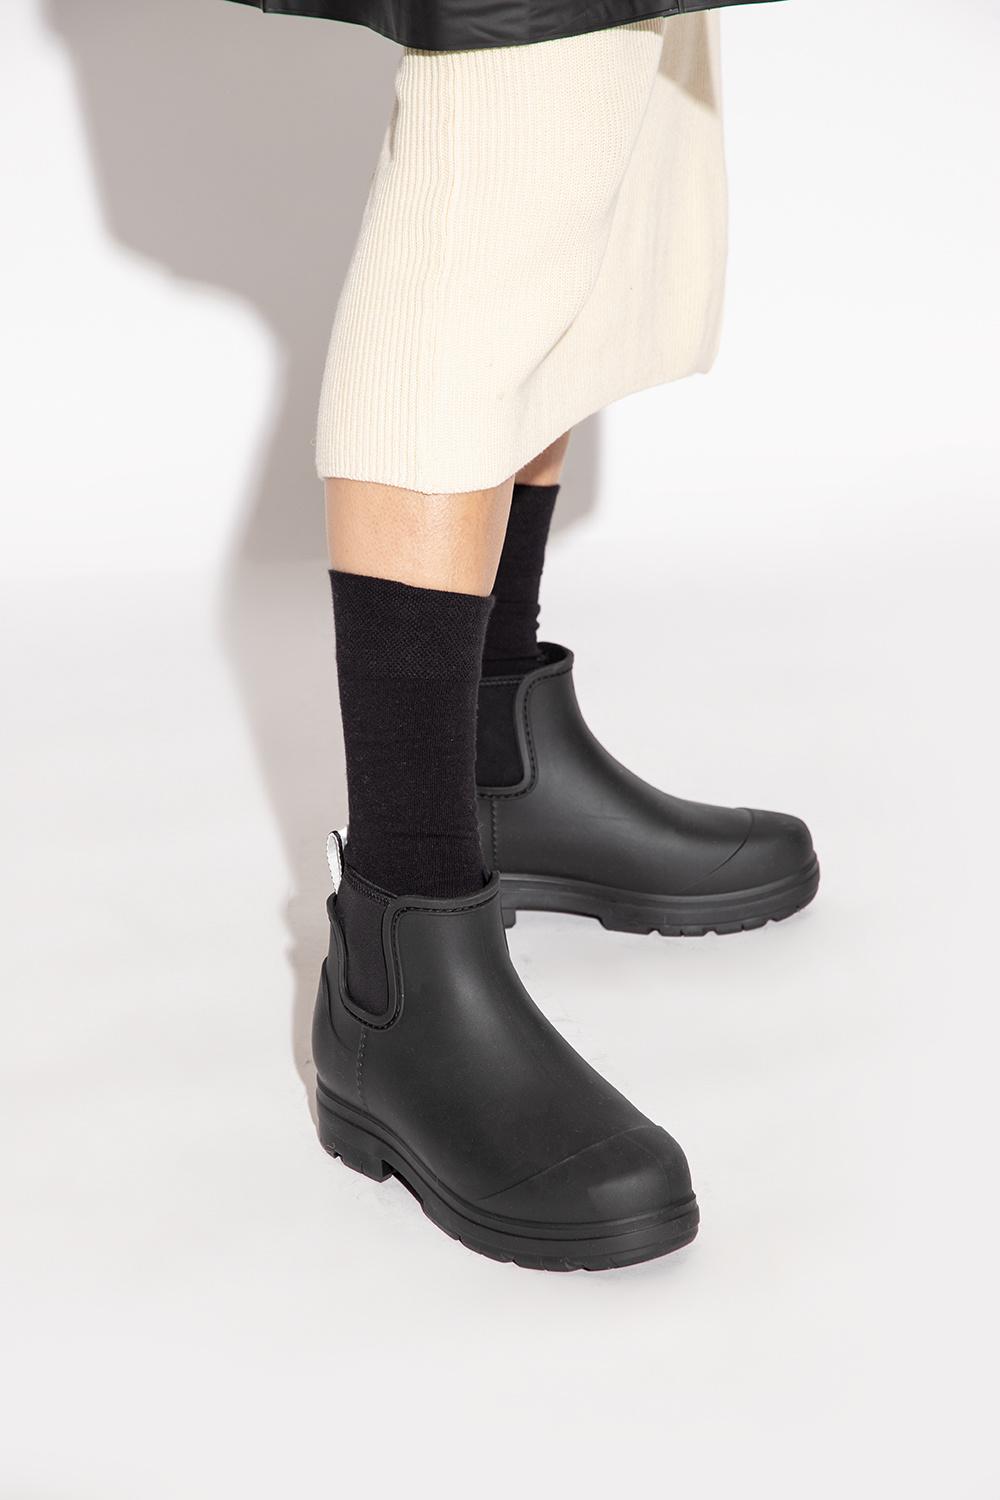 UGG 'droplet' Rain Boots in Black (White) | Lyst